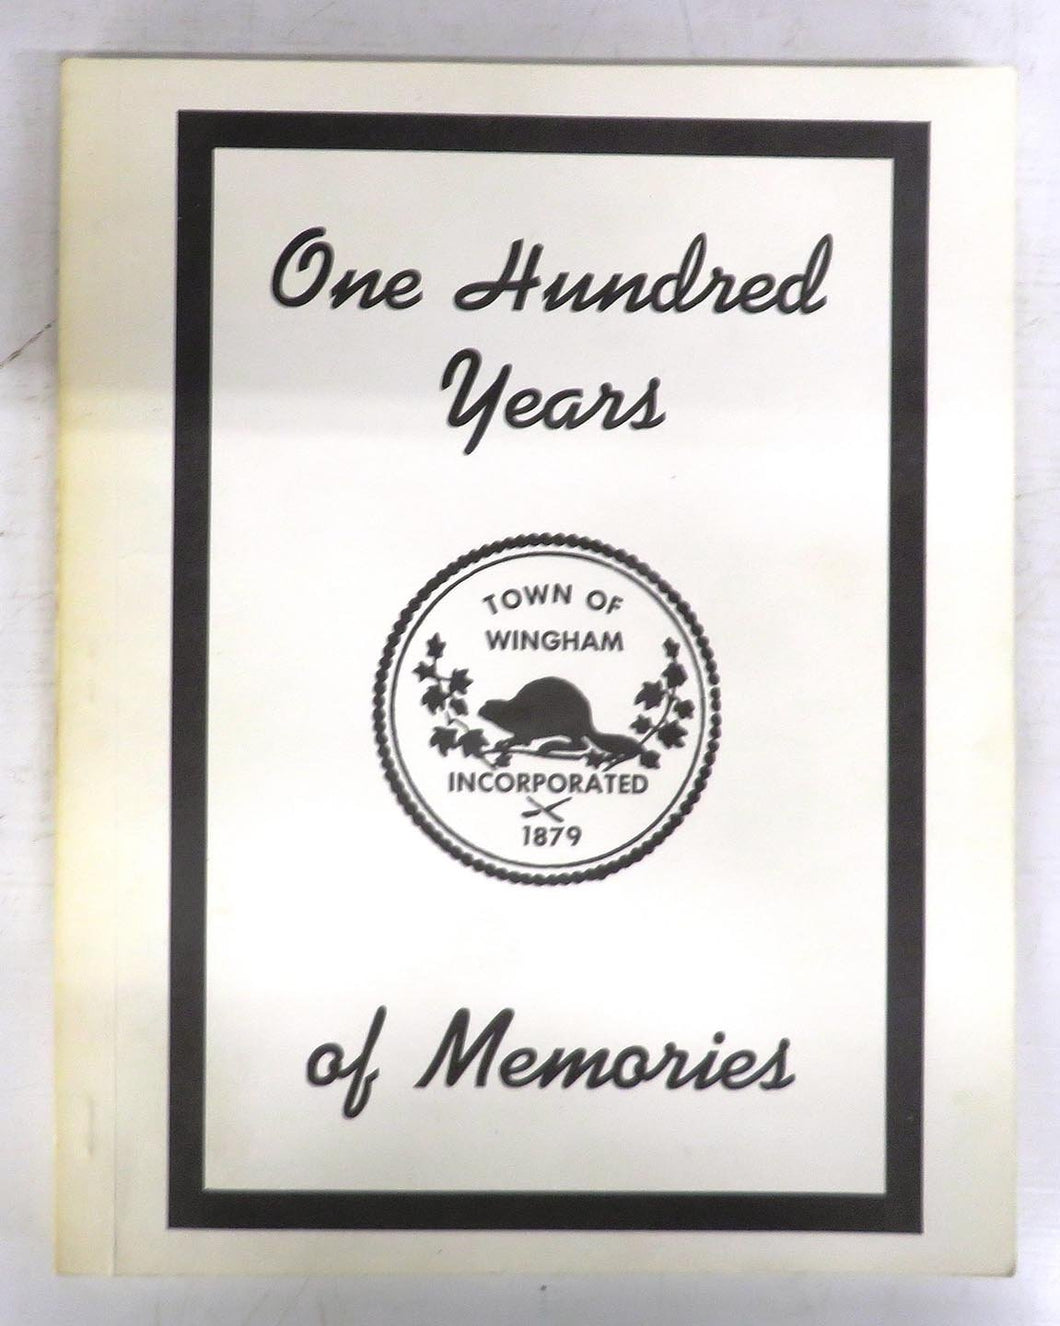 One Hundred Years of Memories